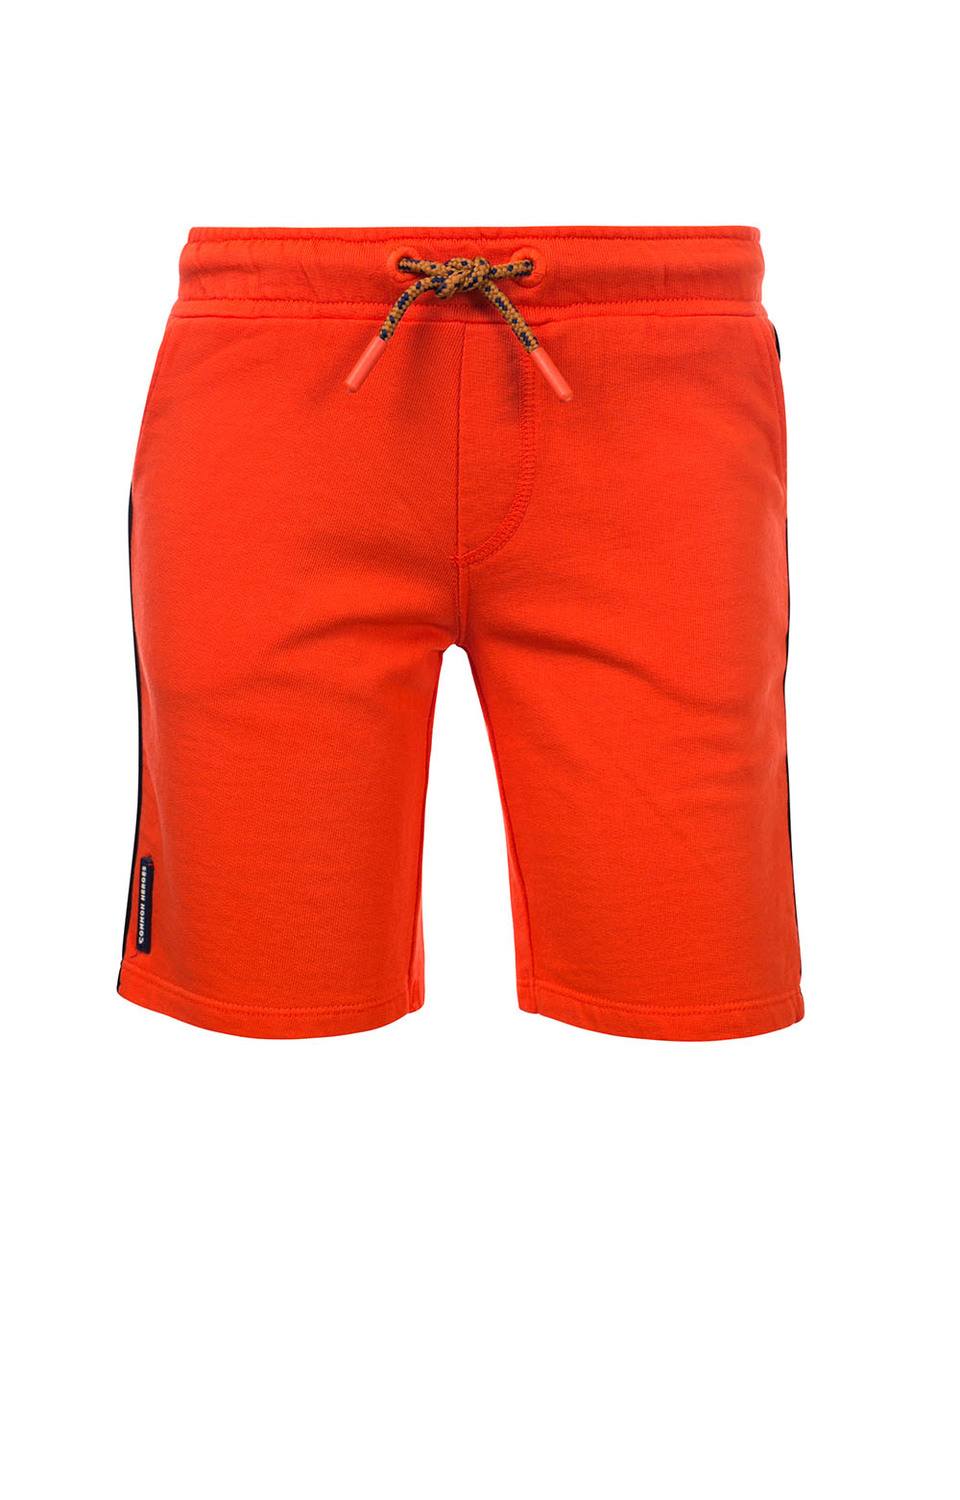 Common Heroes BOYD Shorts